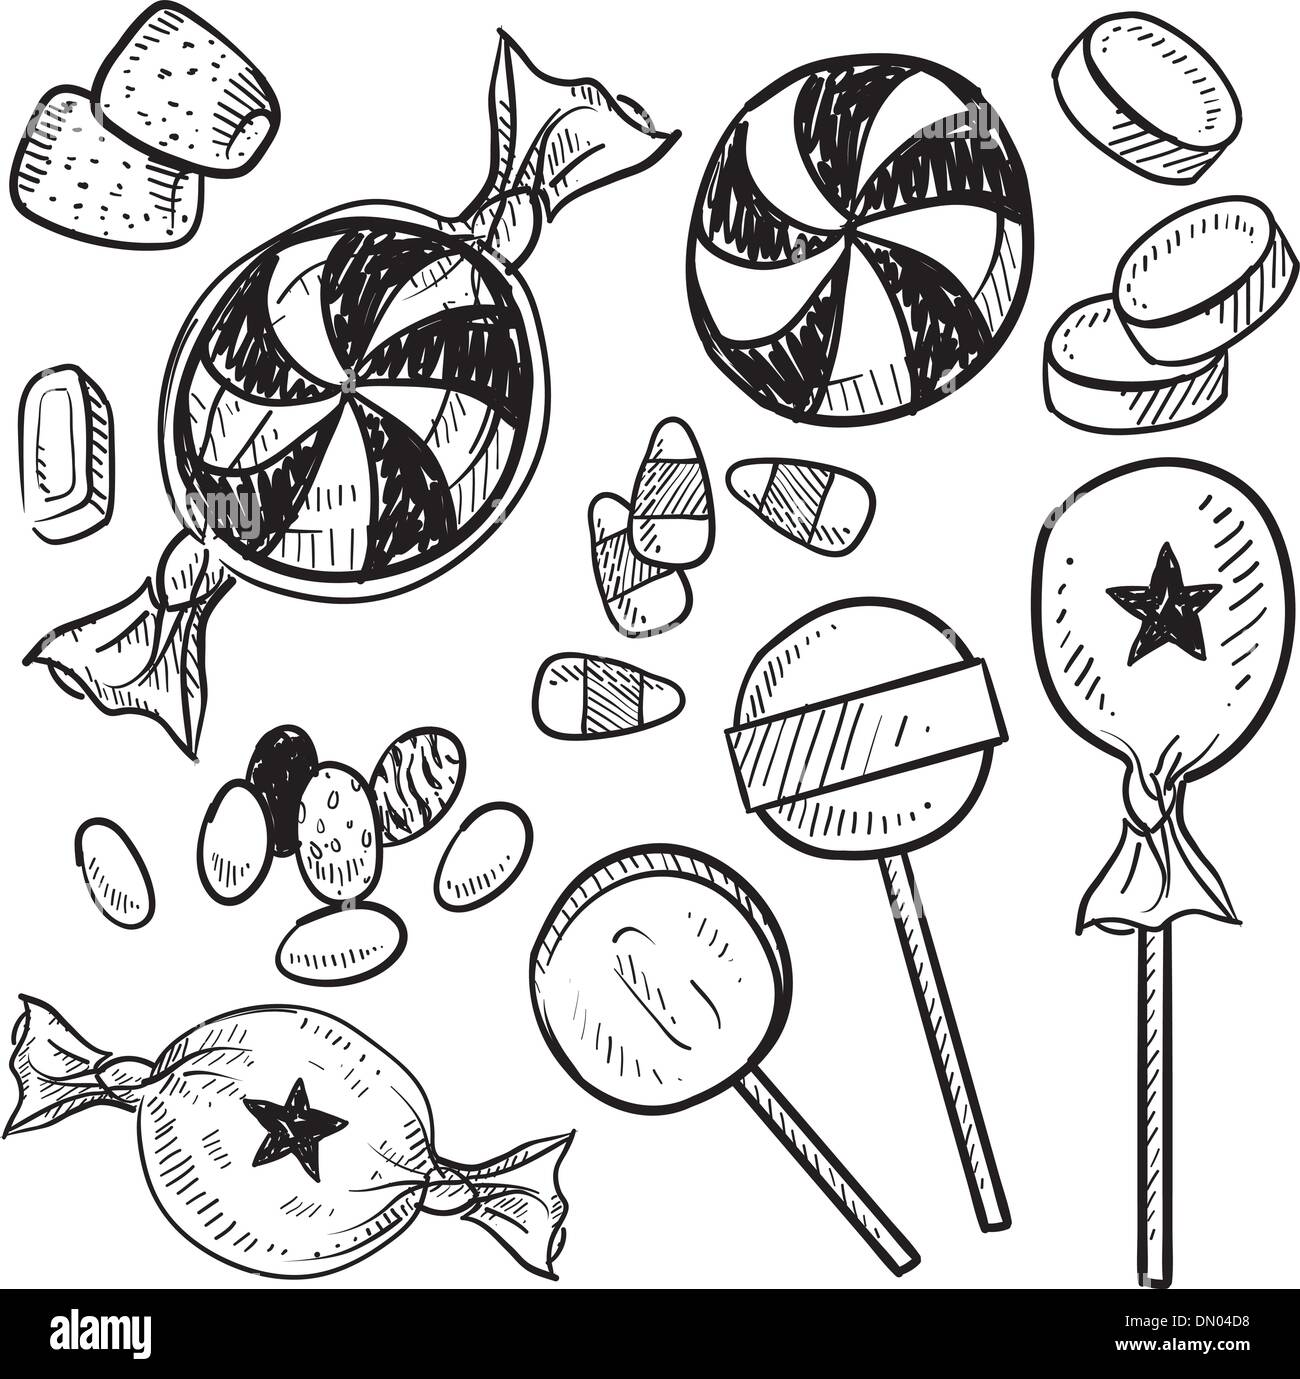 Candy sketch collection. hand drawn line art elements set. black and white  candies. caramel, lollipop, round drops. vector | CanStock